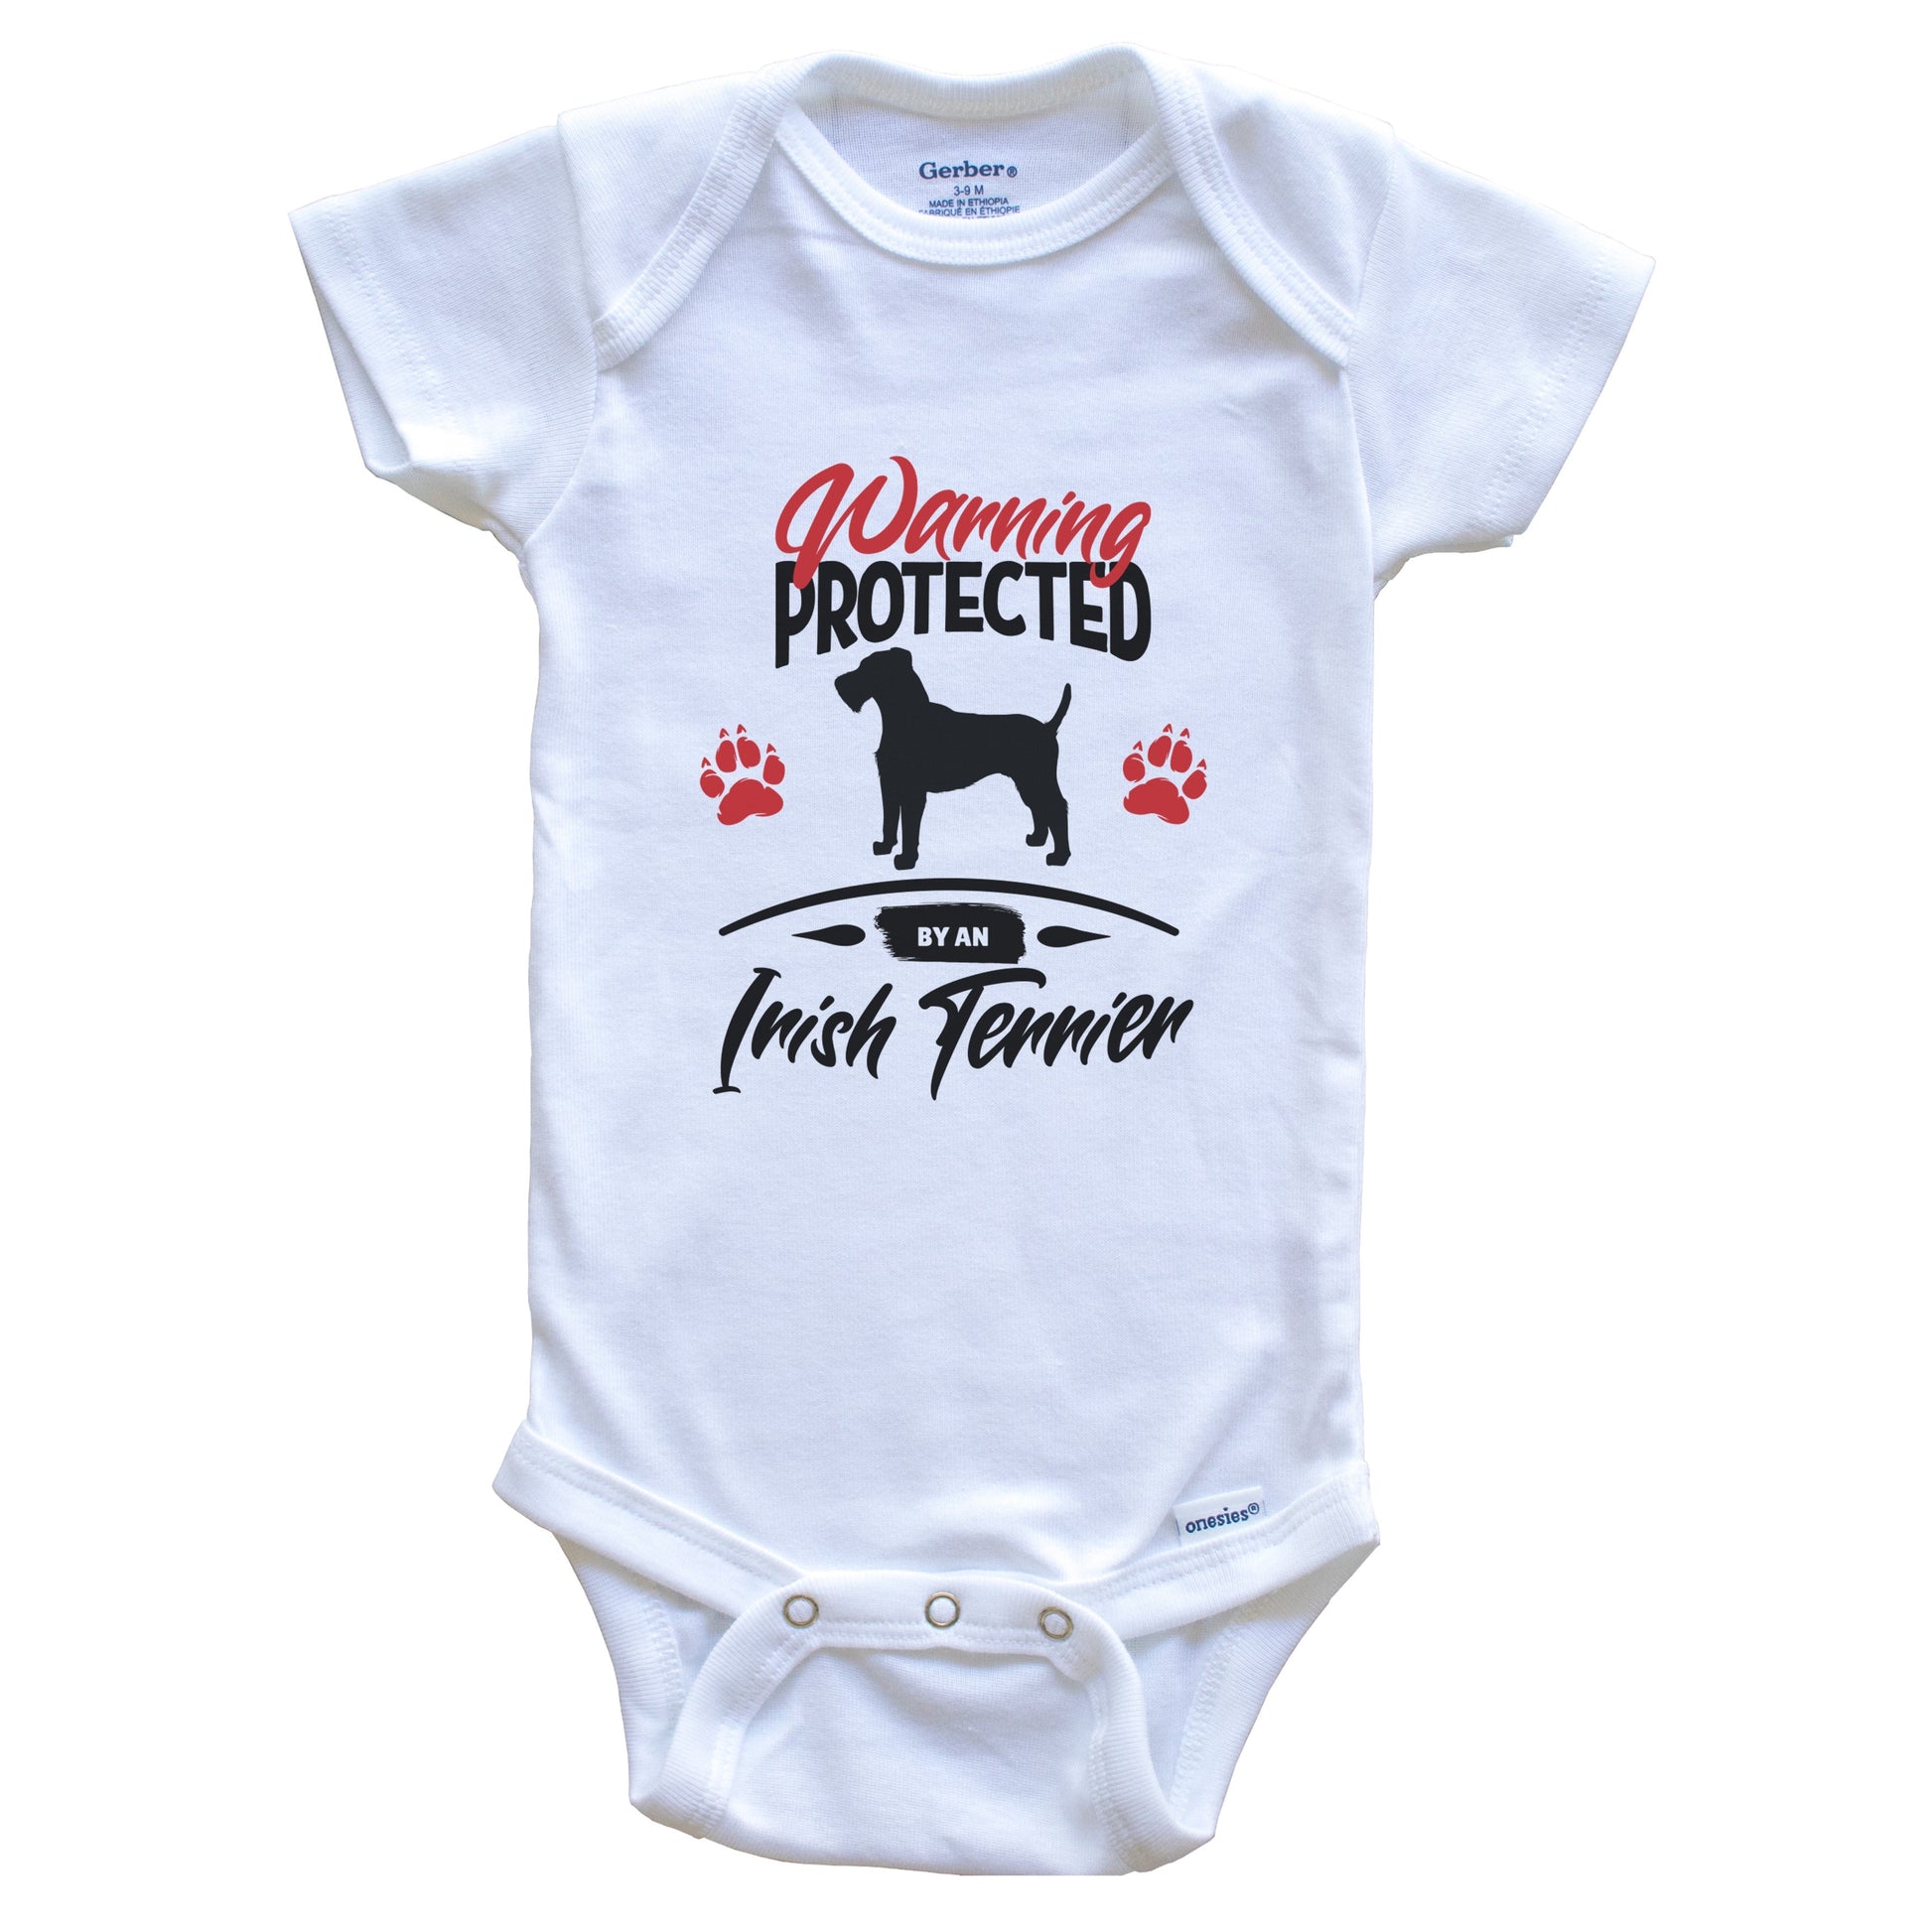 Warning Protected By A Irish Terrier Funny Dog Owner Baby Bodysuit